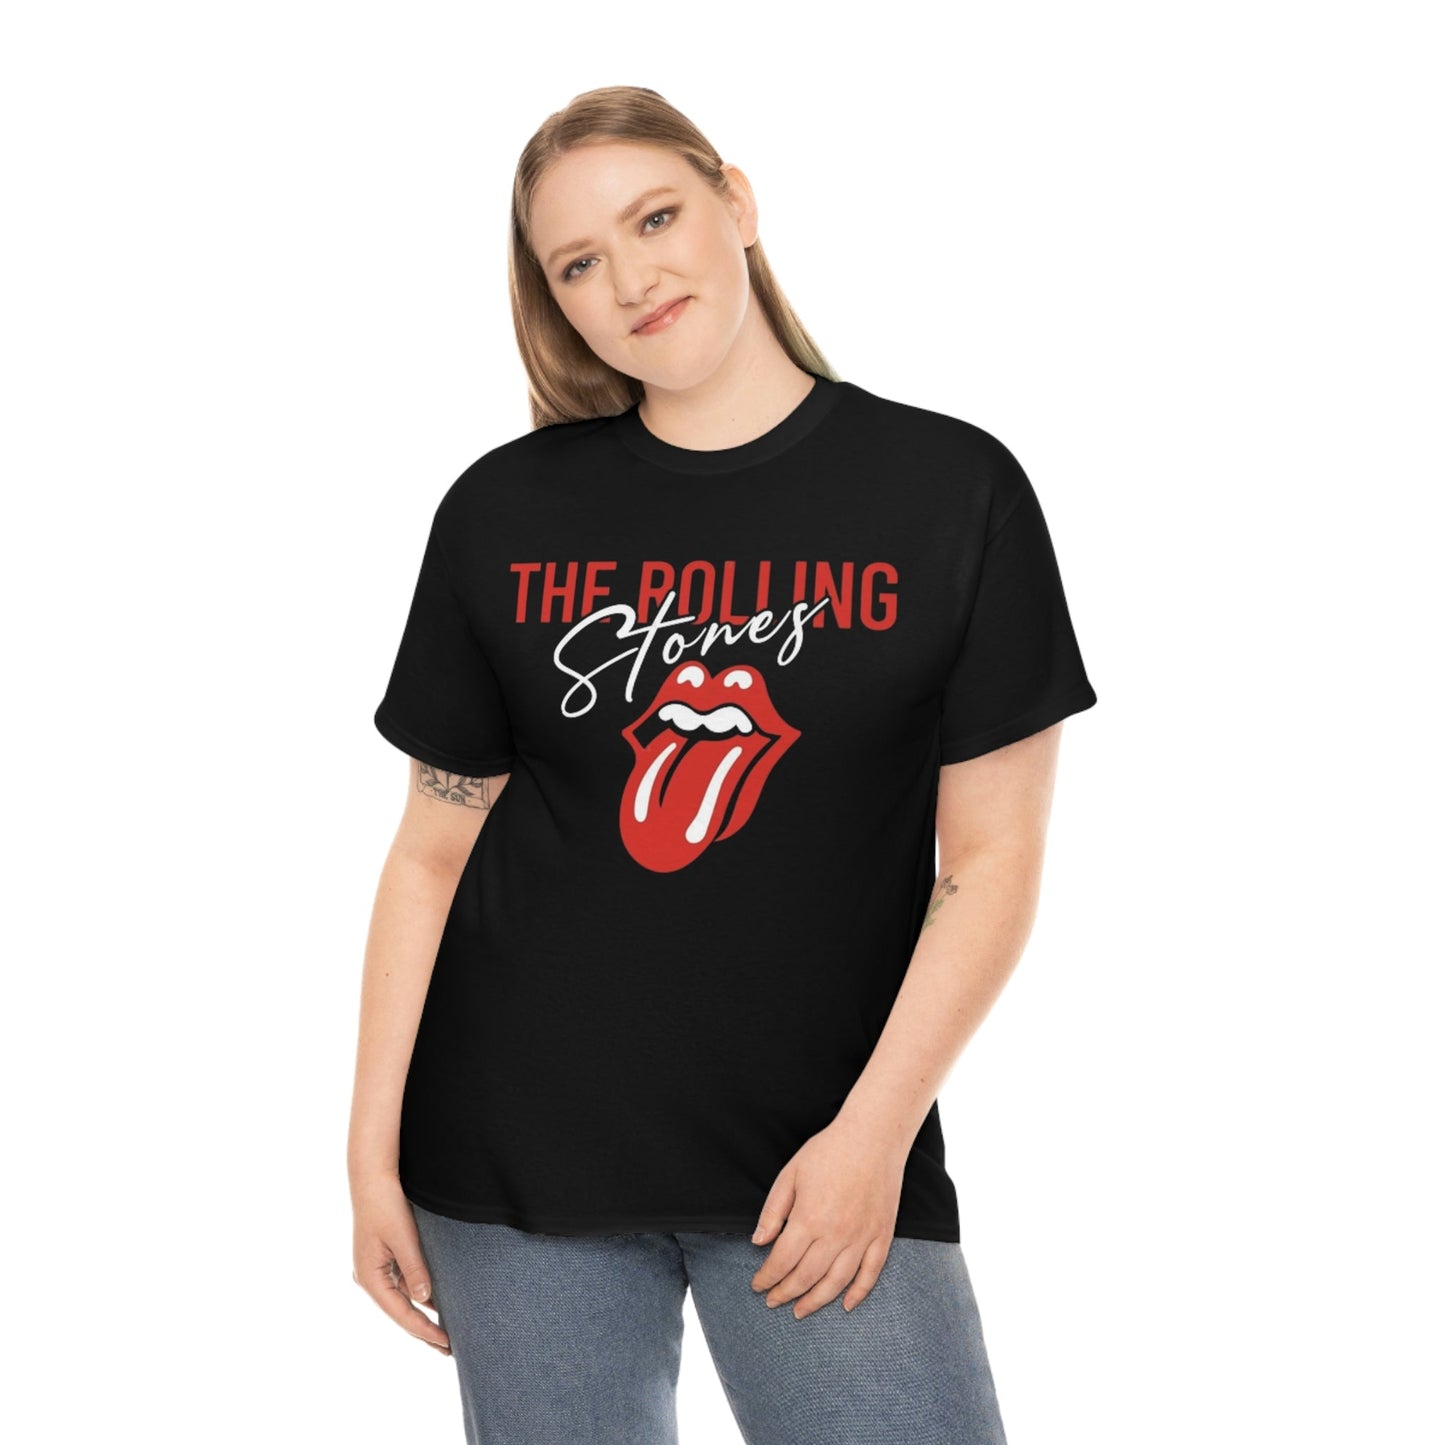 The Rolling Stones Distressed Tongue T-Shirt - RetroTeeShop